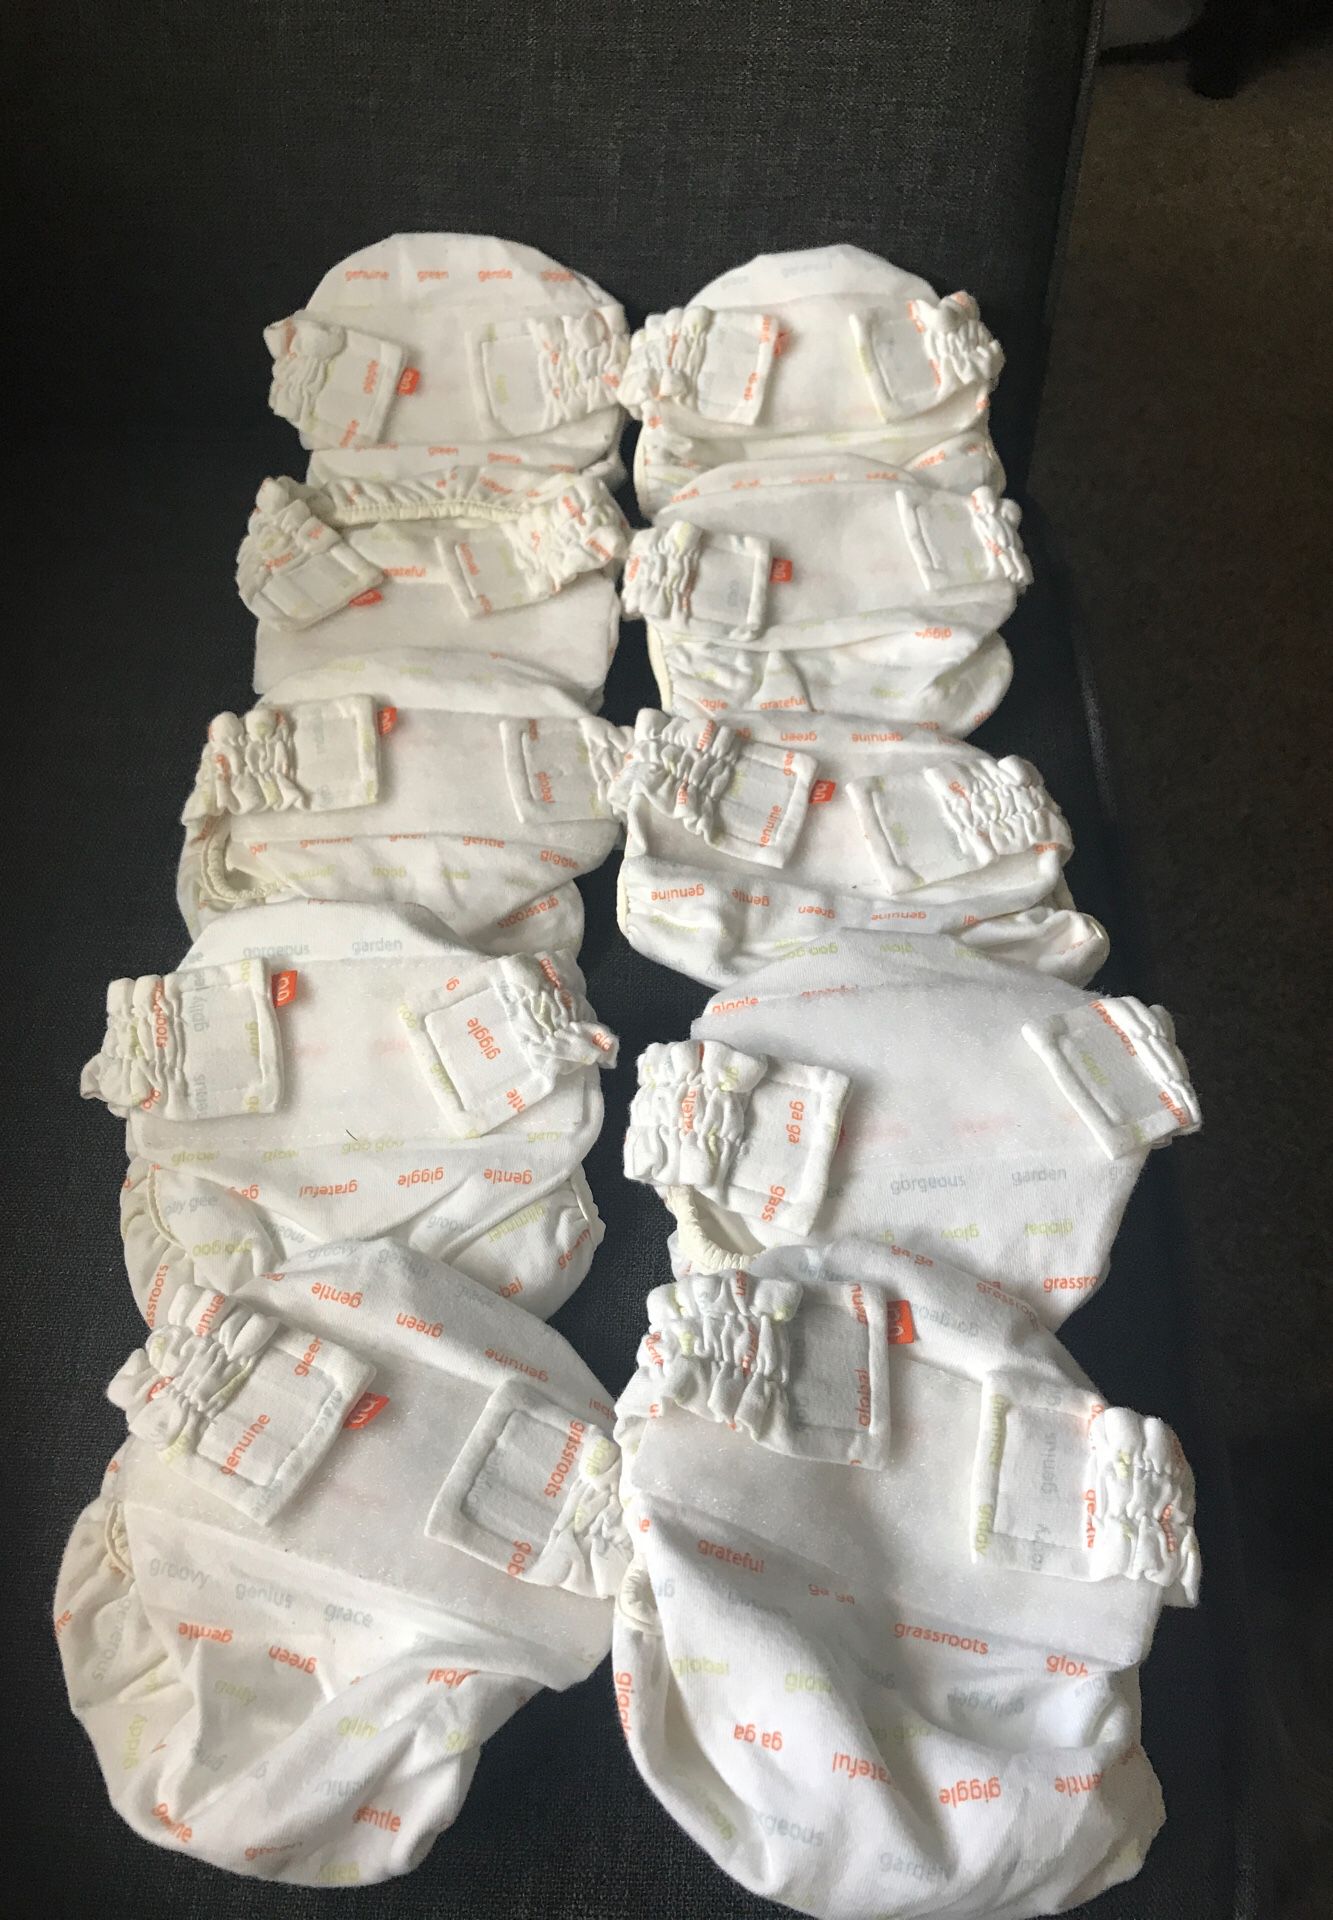 (B) cloth diapers, newborn diapers, hybrid G-Diapers